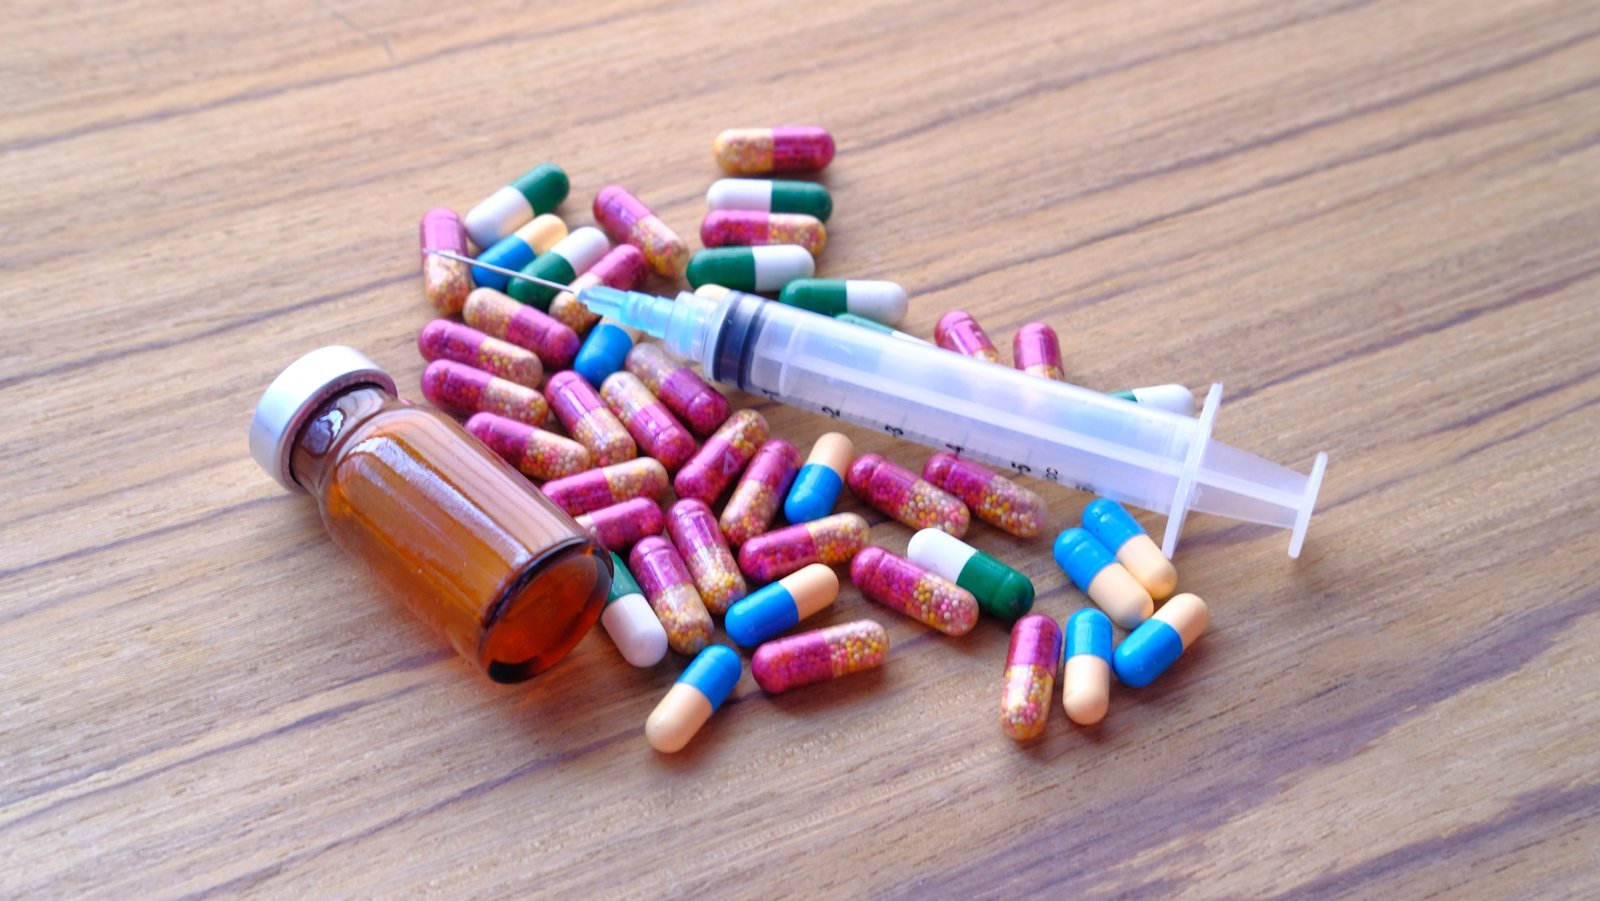 5 Ways Of supplements like steroids That Can Drive You Bankrupt - Fast!